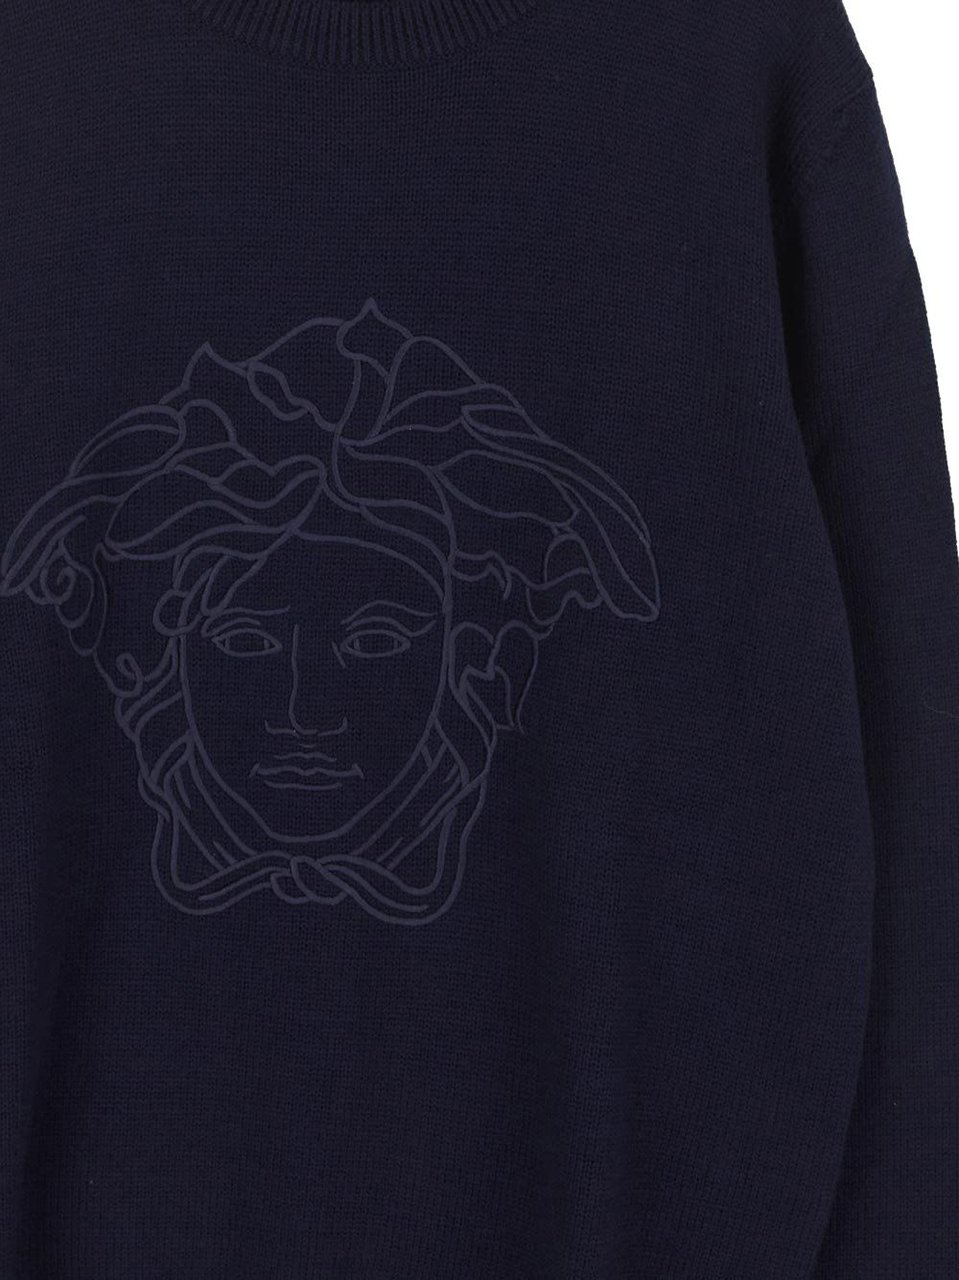 Versace Medusa Embroidery Knit Sweater Blauw